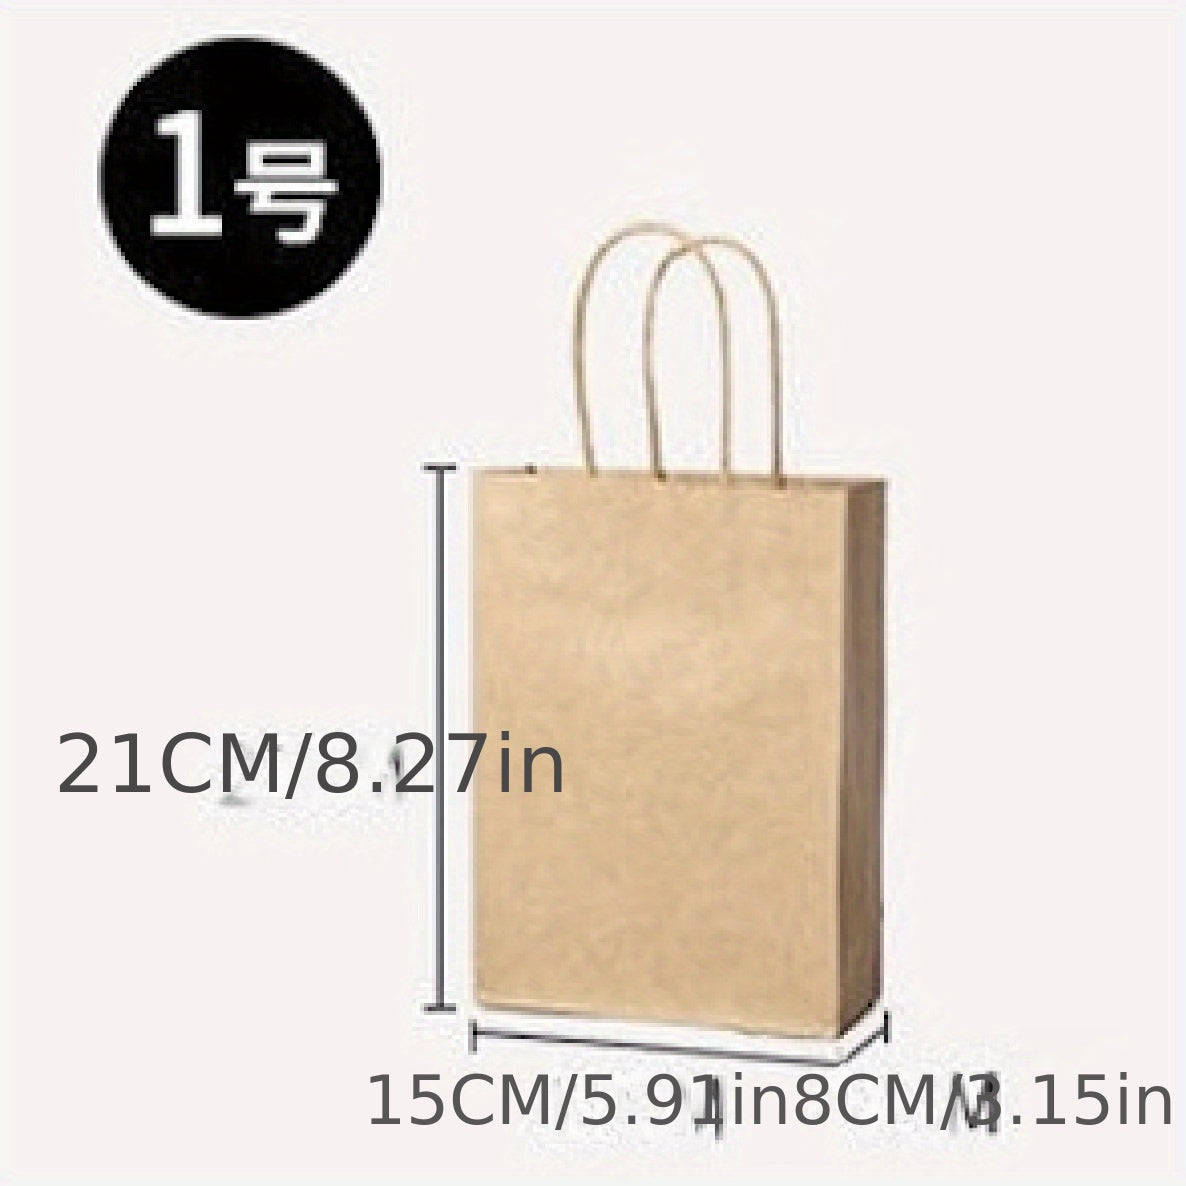 100pcs, 130gsm Brown Kraft Paper Bags With Handles - 100% Recyclable Takeaway Bags For Businesses, Retail, Grocery, Boutique Supplies, Parcel, Packaging, And Home Kitchen Items - Durable And Eco-Friendly